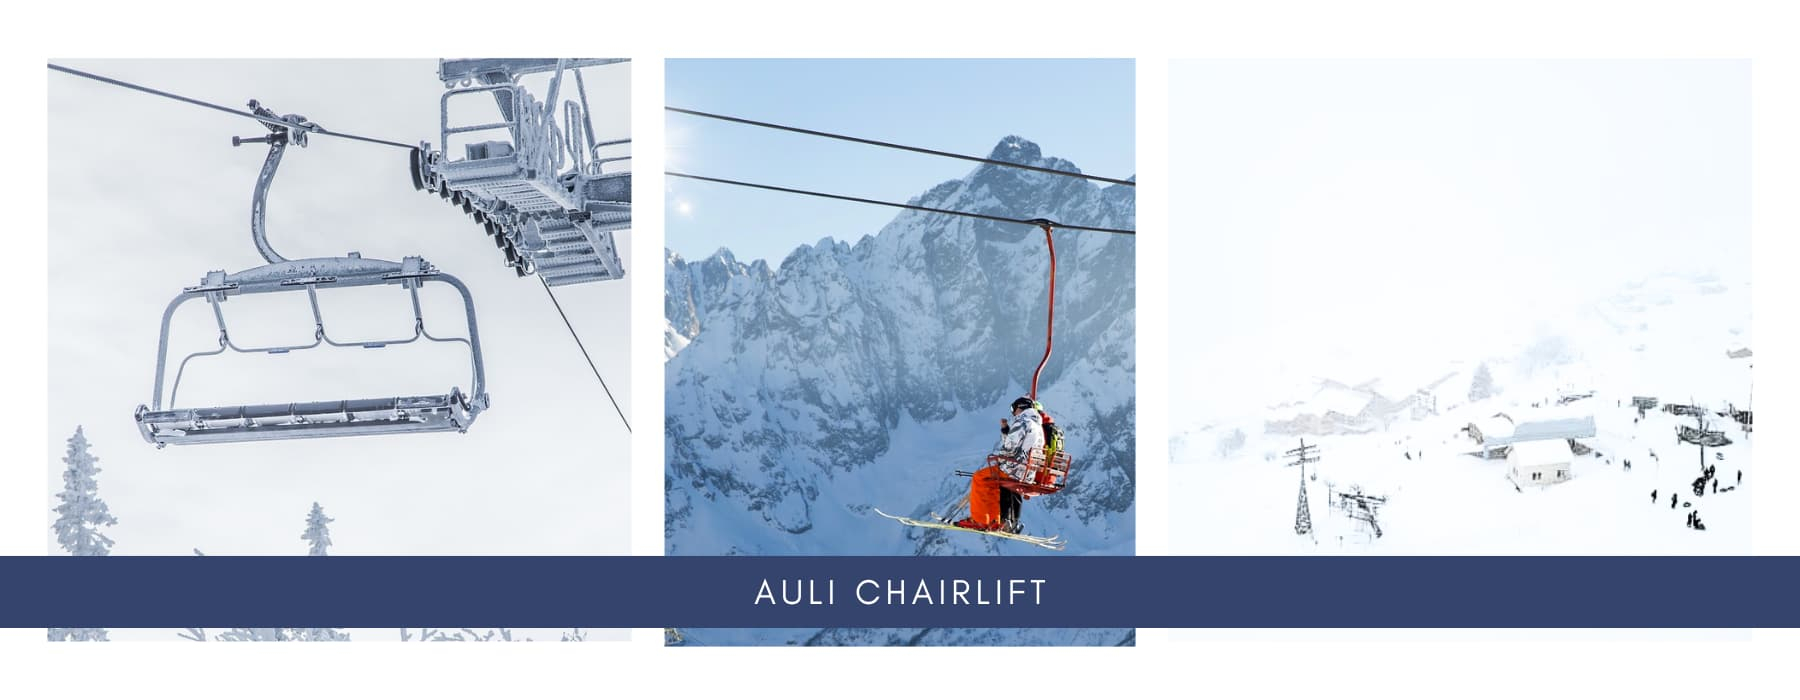 auli chairlift